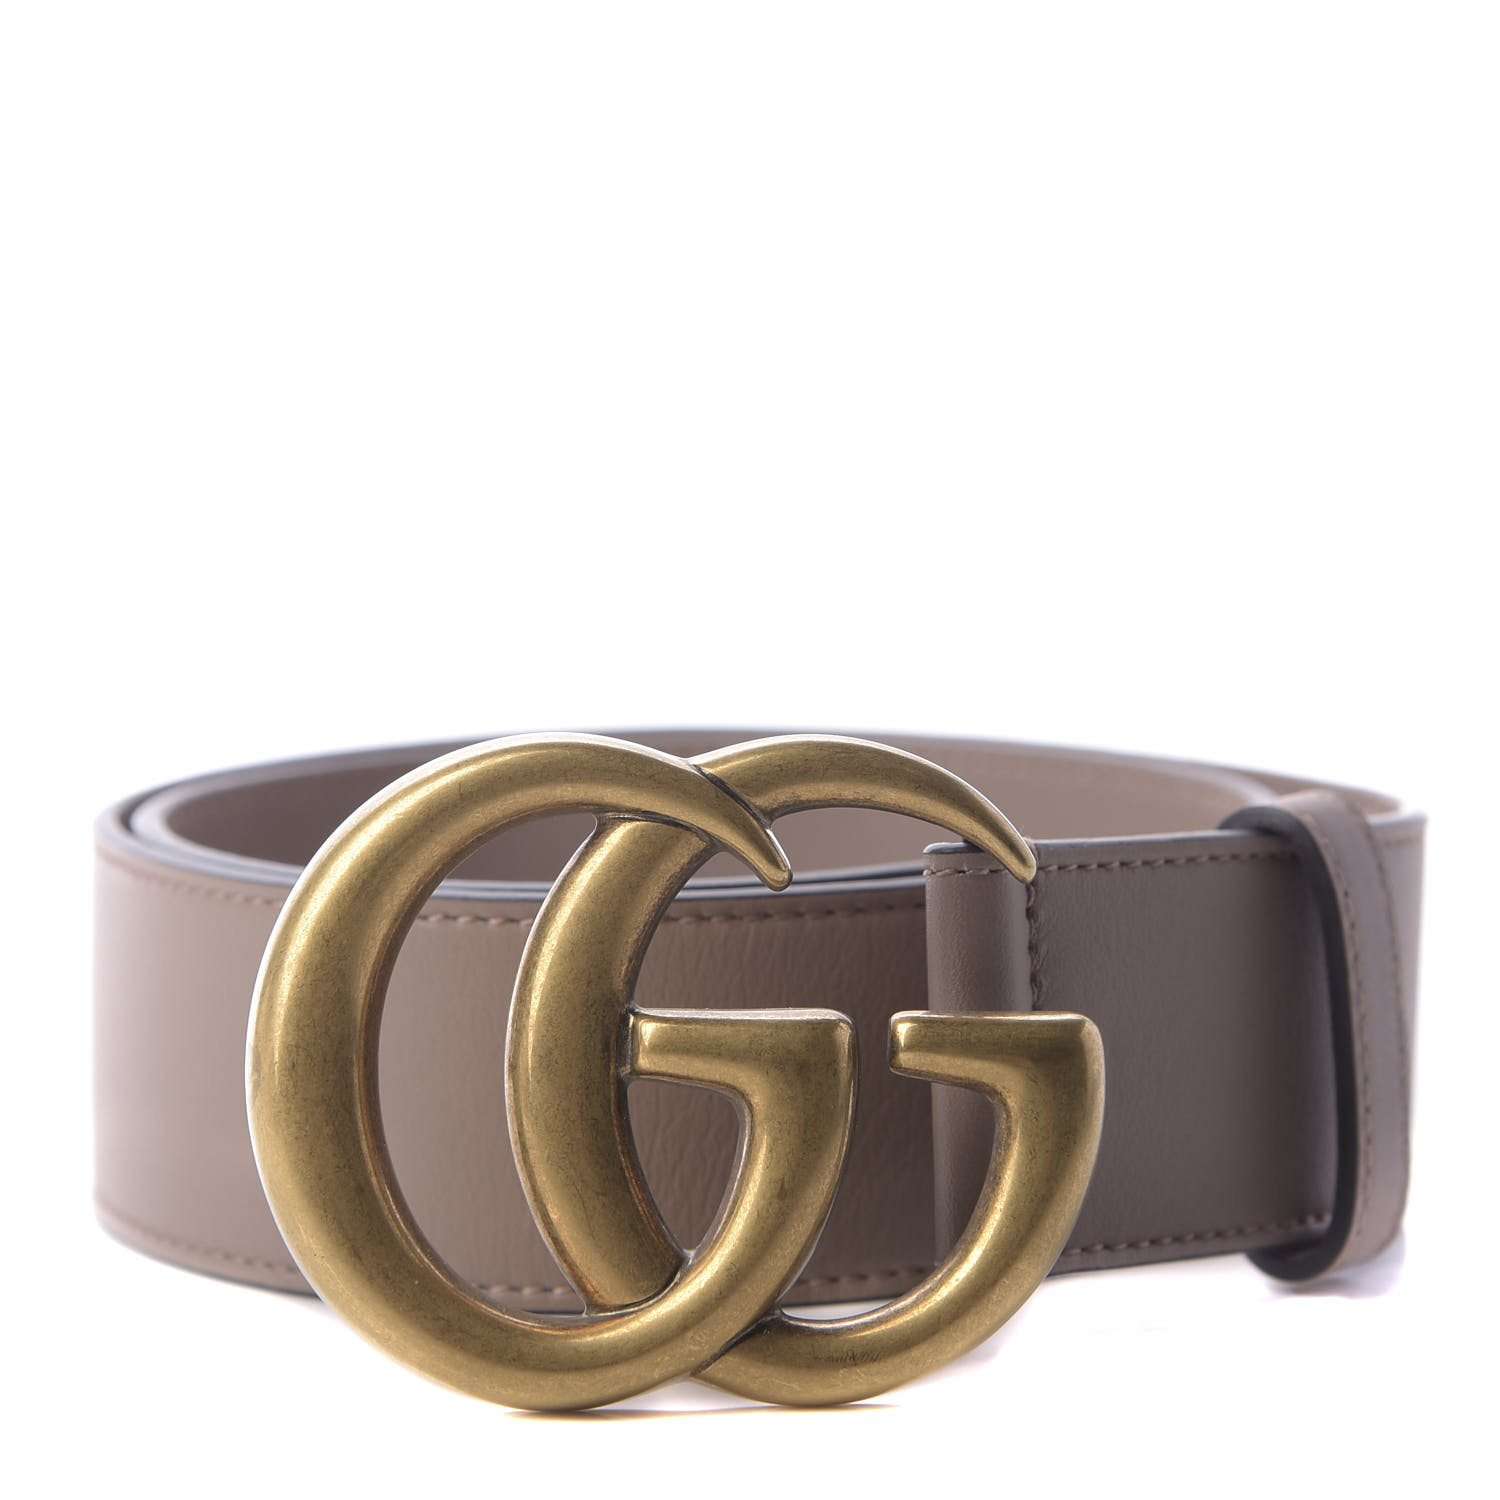 GUCCI Calfskin Double G Marmont Belt 65 26 Dusty Pink 652441 | FASHIONPHILE